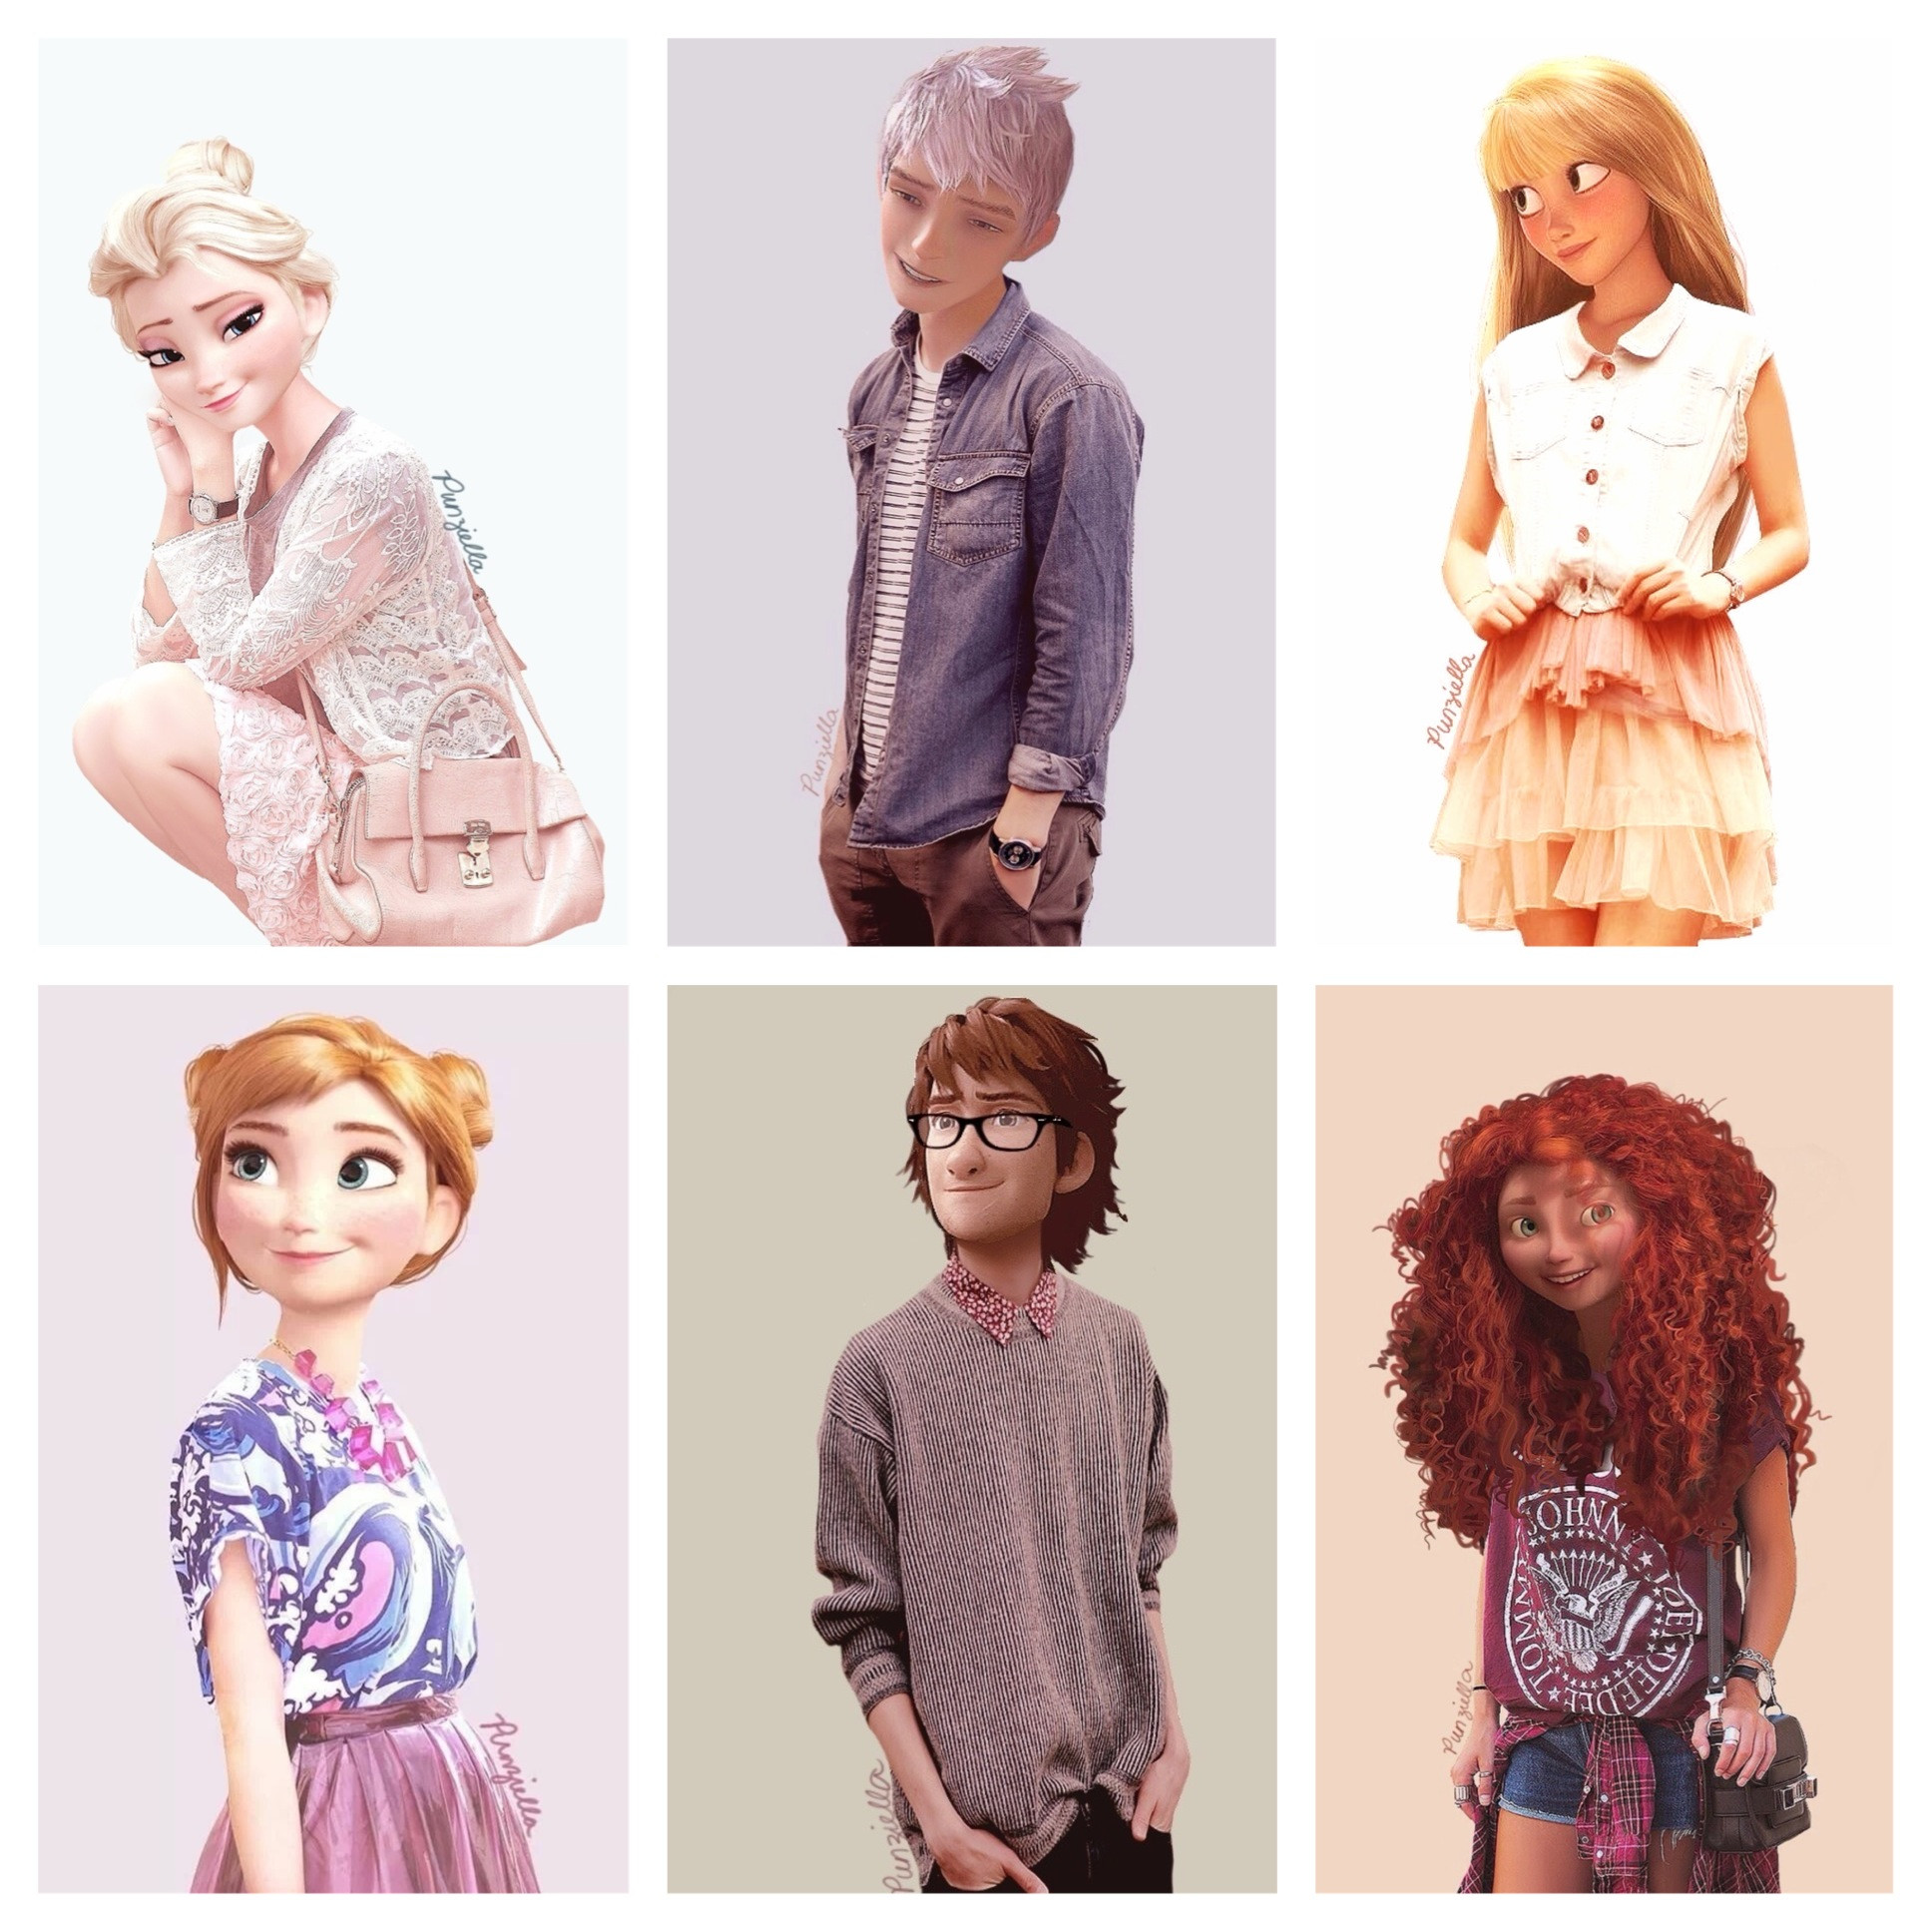 1936x1936 Hipster versions of 3D animated cartoon characters. Elsa and Anna from  Frozen, Jack Frost